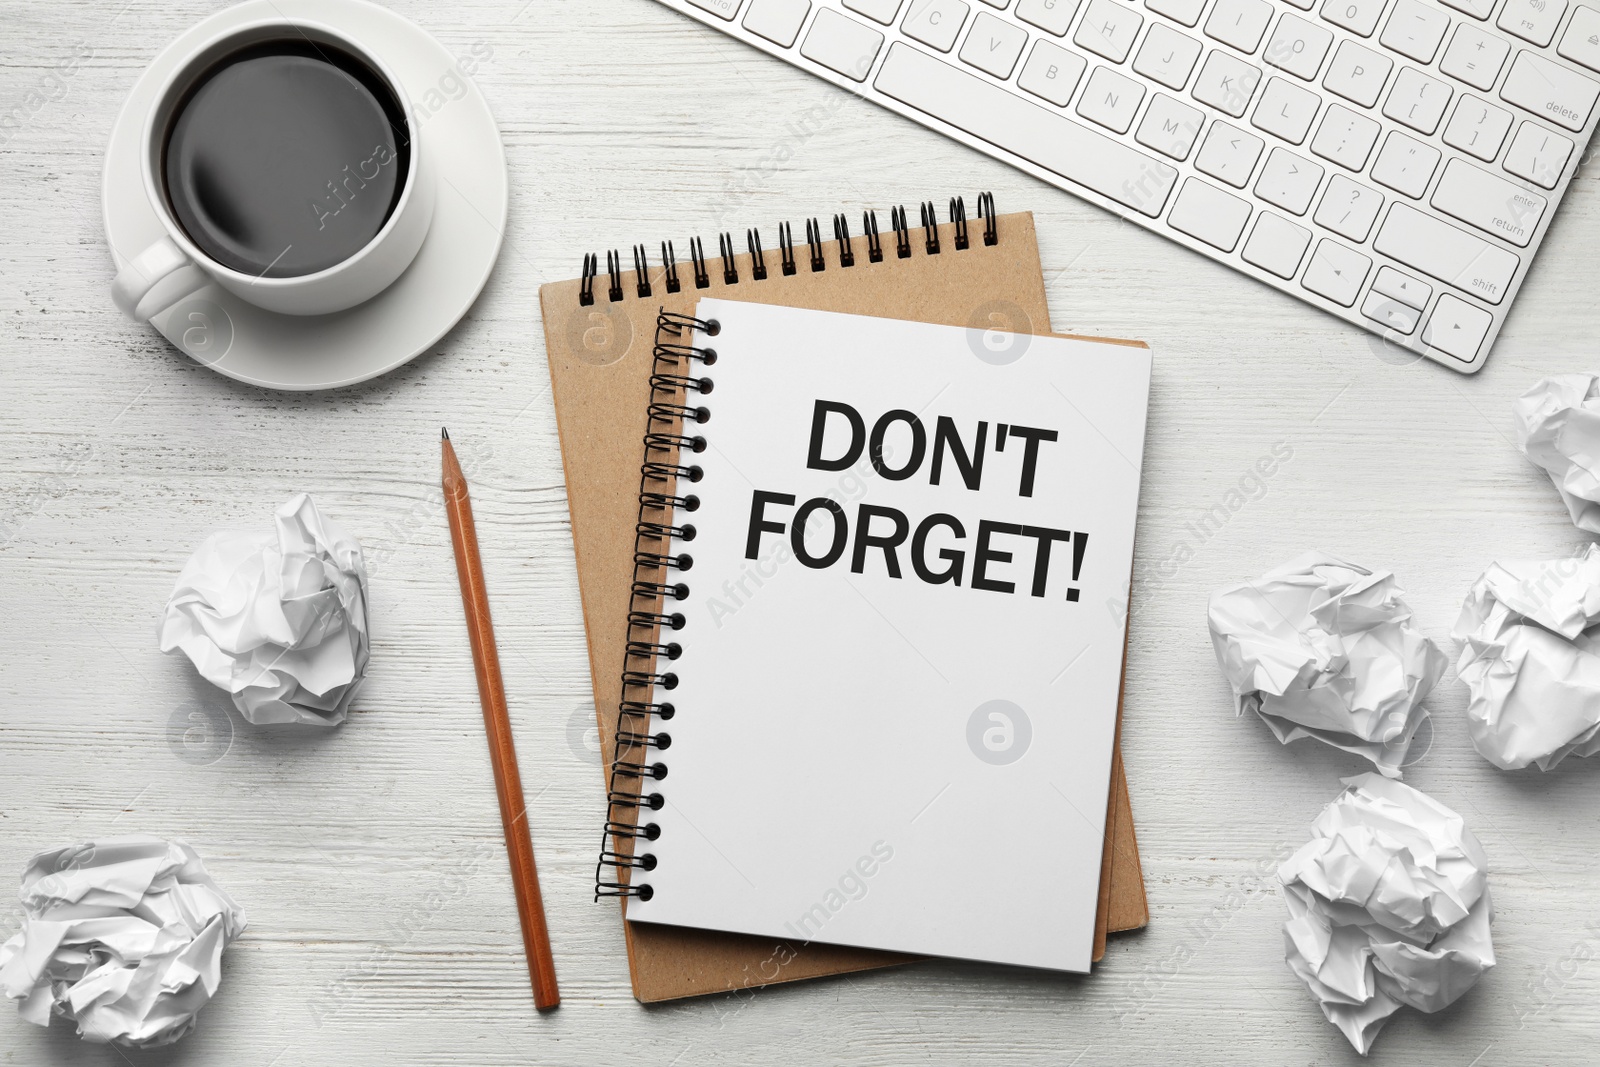 Image of Reminder DON'T FORGET written in notebook on wooden white table, flat lay 